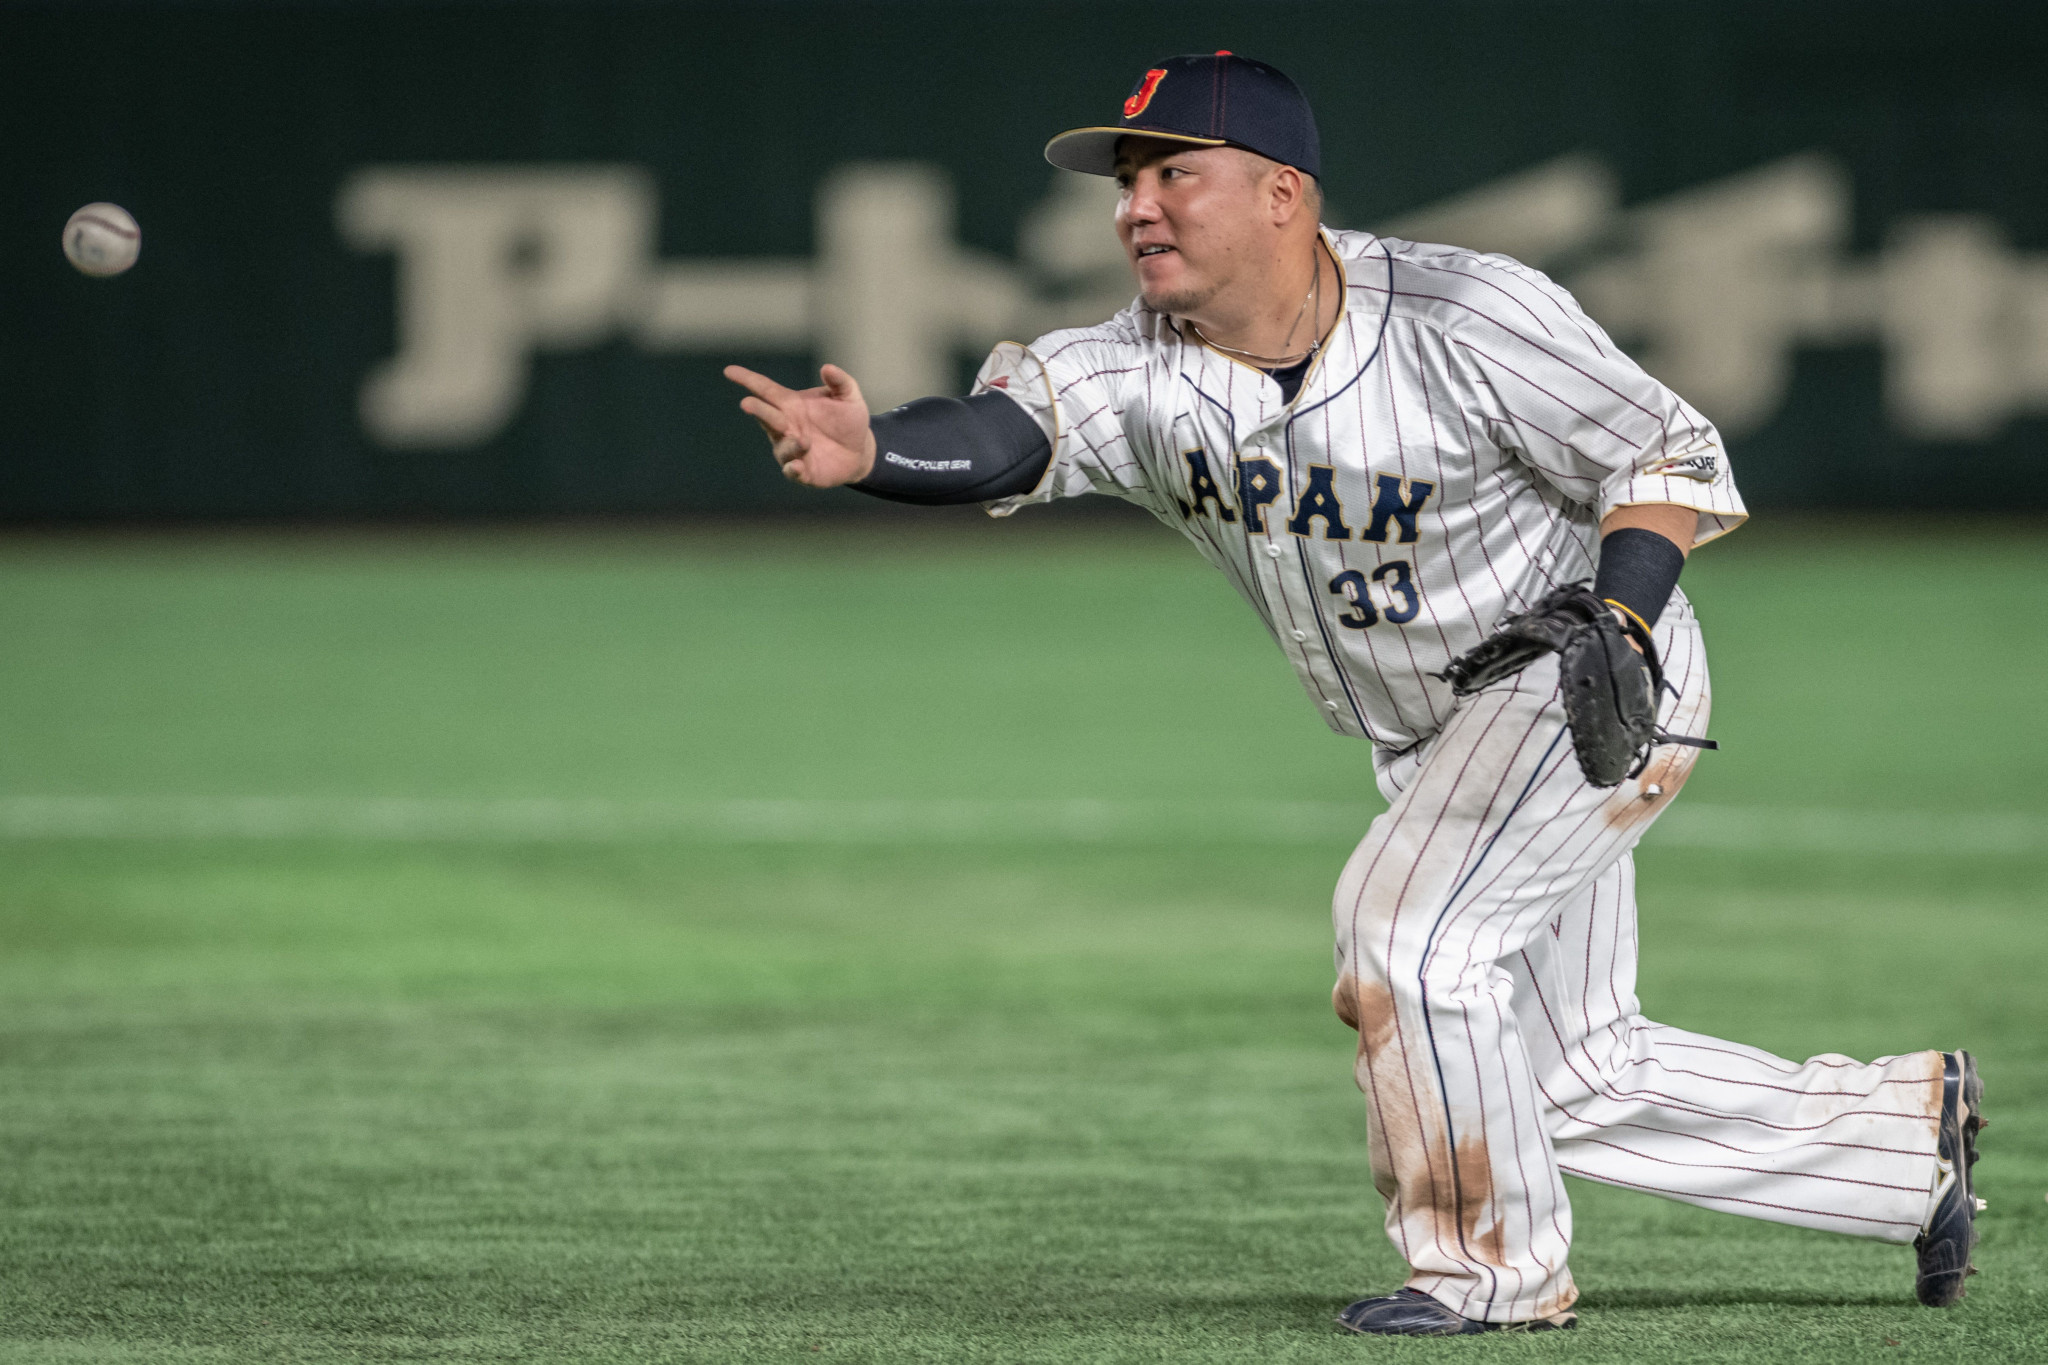 Seibu Lions has indefinitely suspended infielder Hotaka Yamakawa despite Tokyo prosecutors deciding not to indict him over allegations of rape ©Getty Images